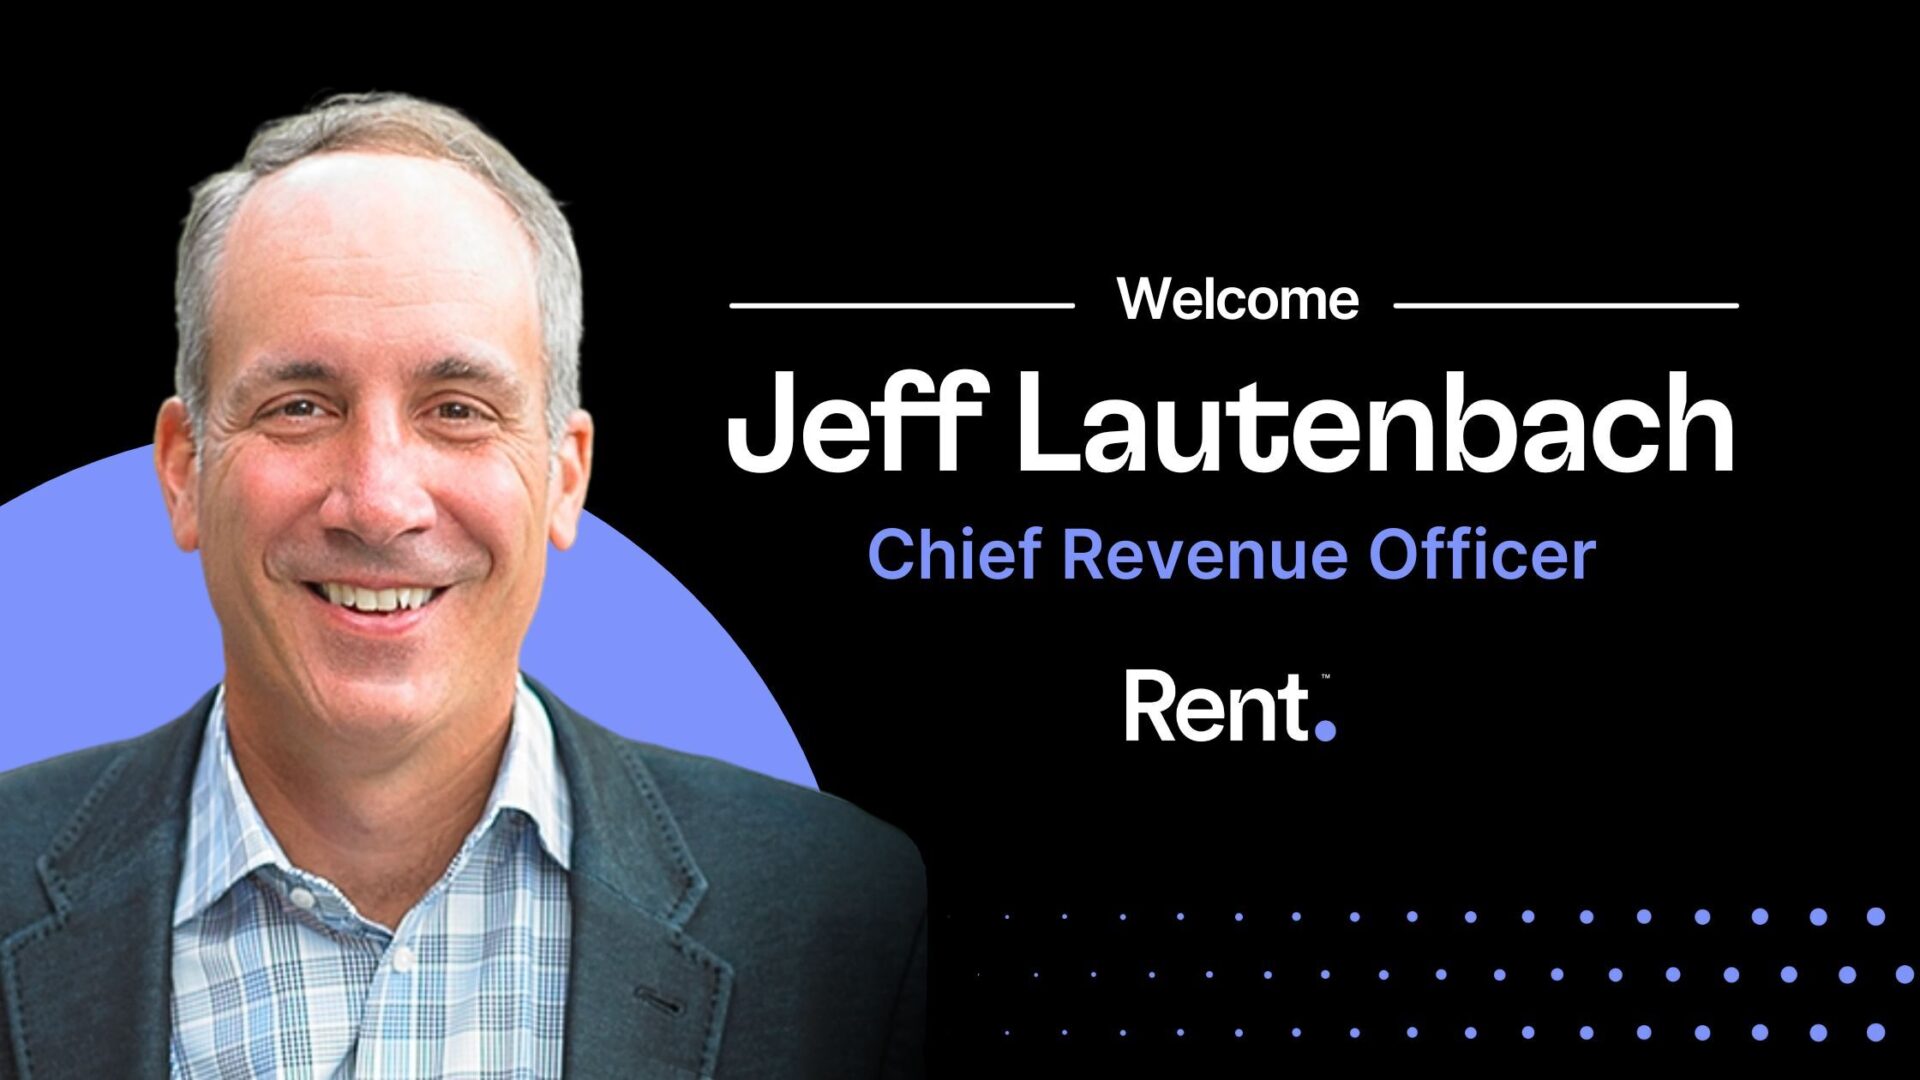 Business Wire: Rent. Welcomes Jeff Lautenbach as Chief Revenue Officer